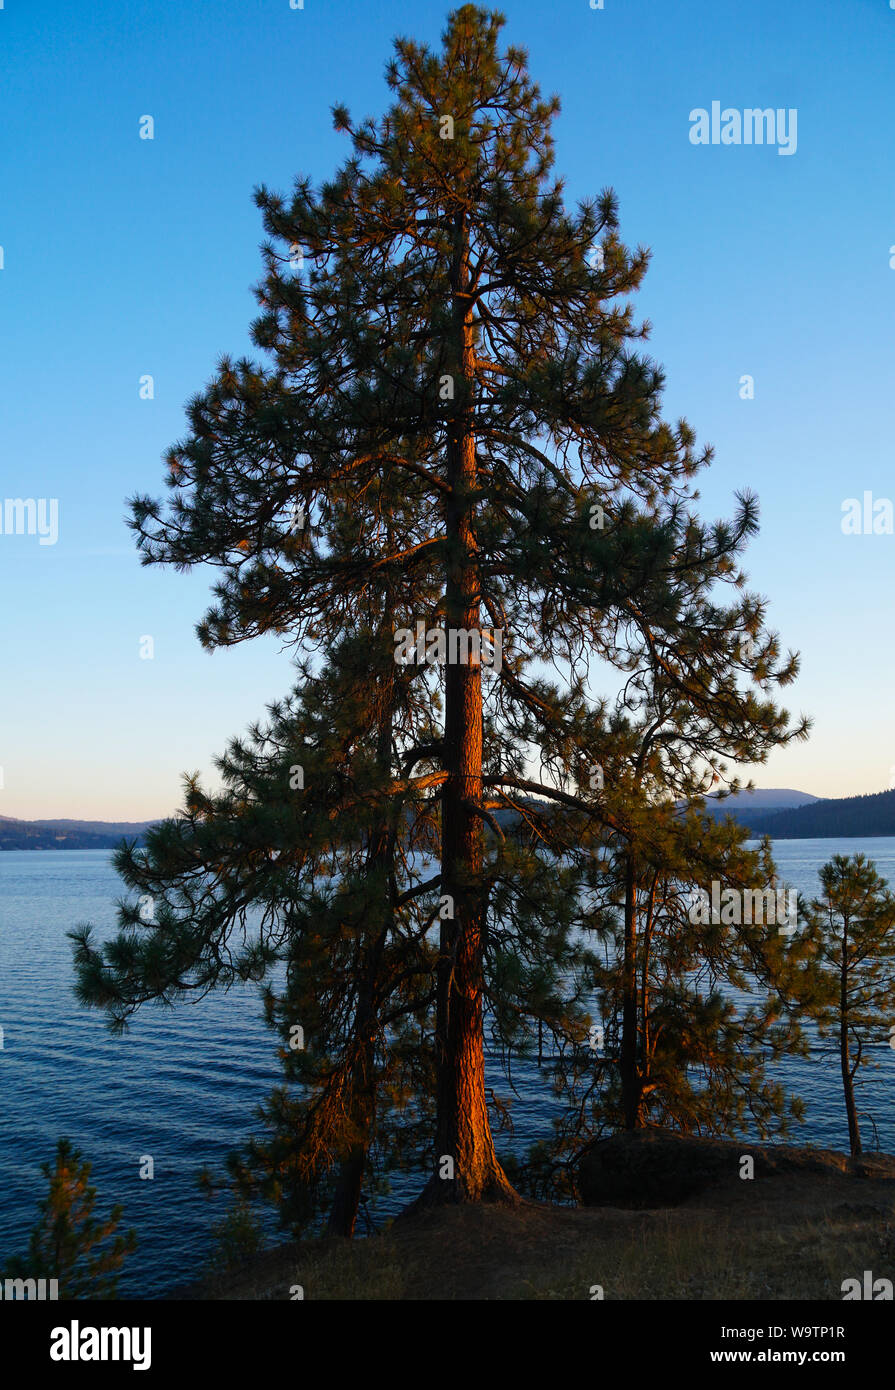 The late afternoon sun shining on a lakeside tree. Stock Photo